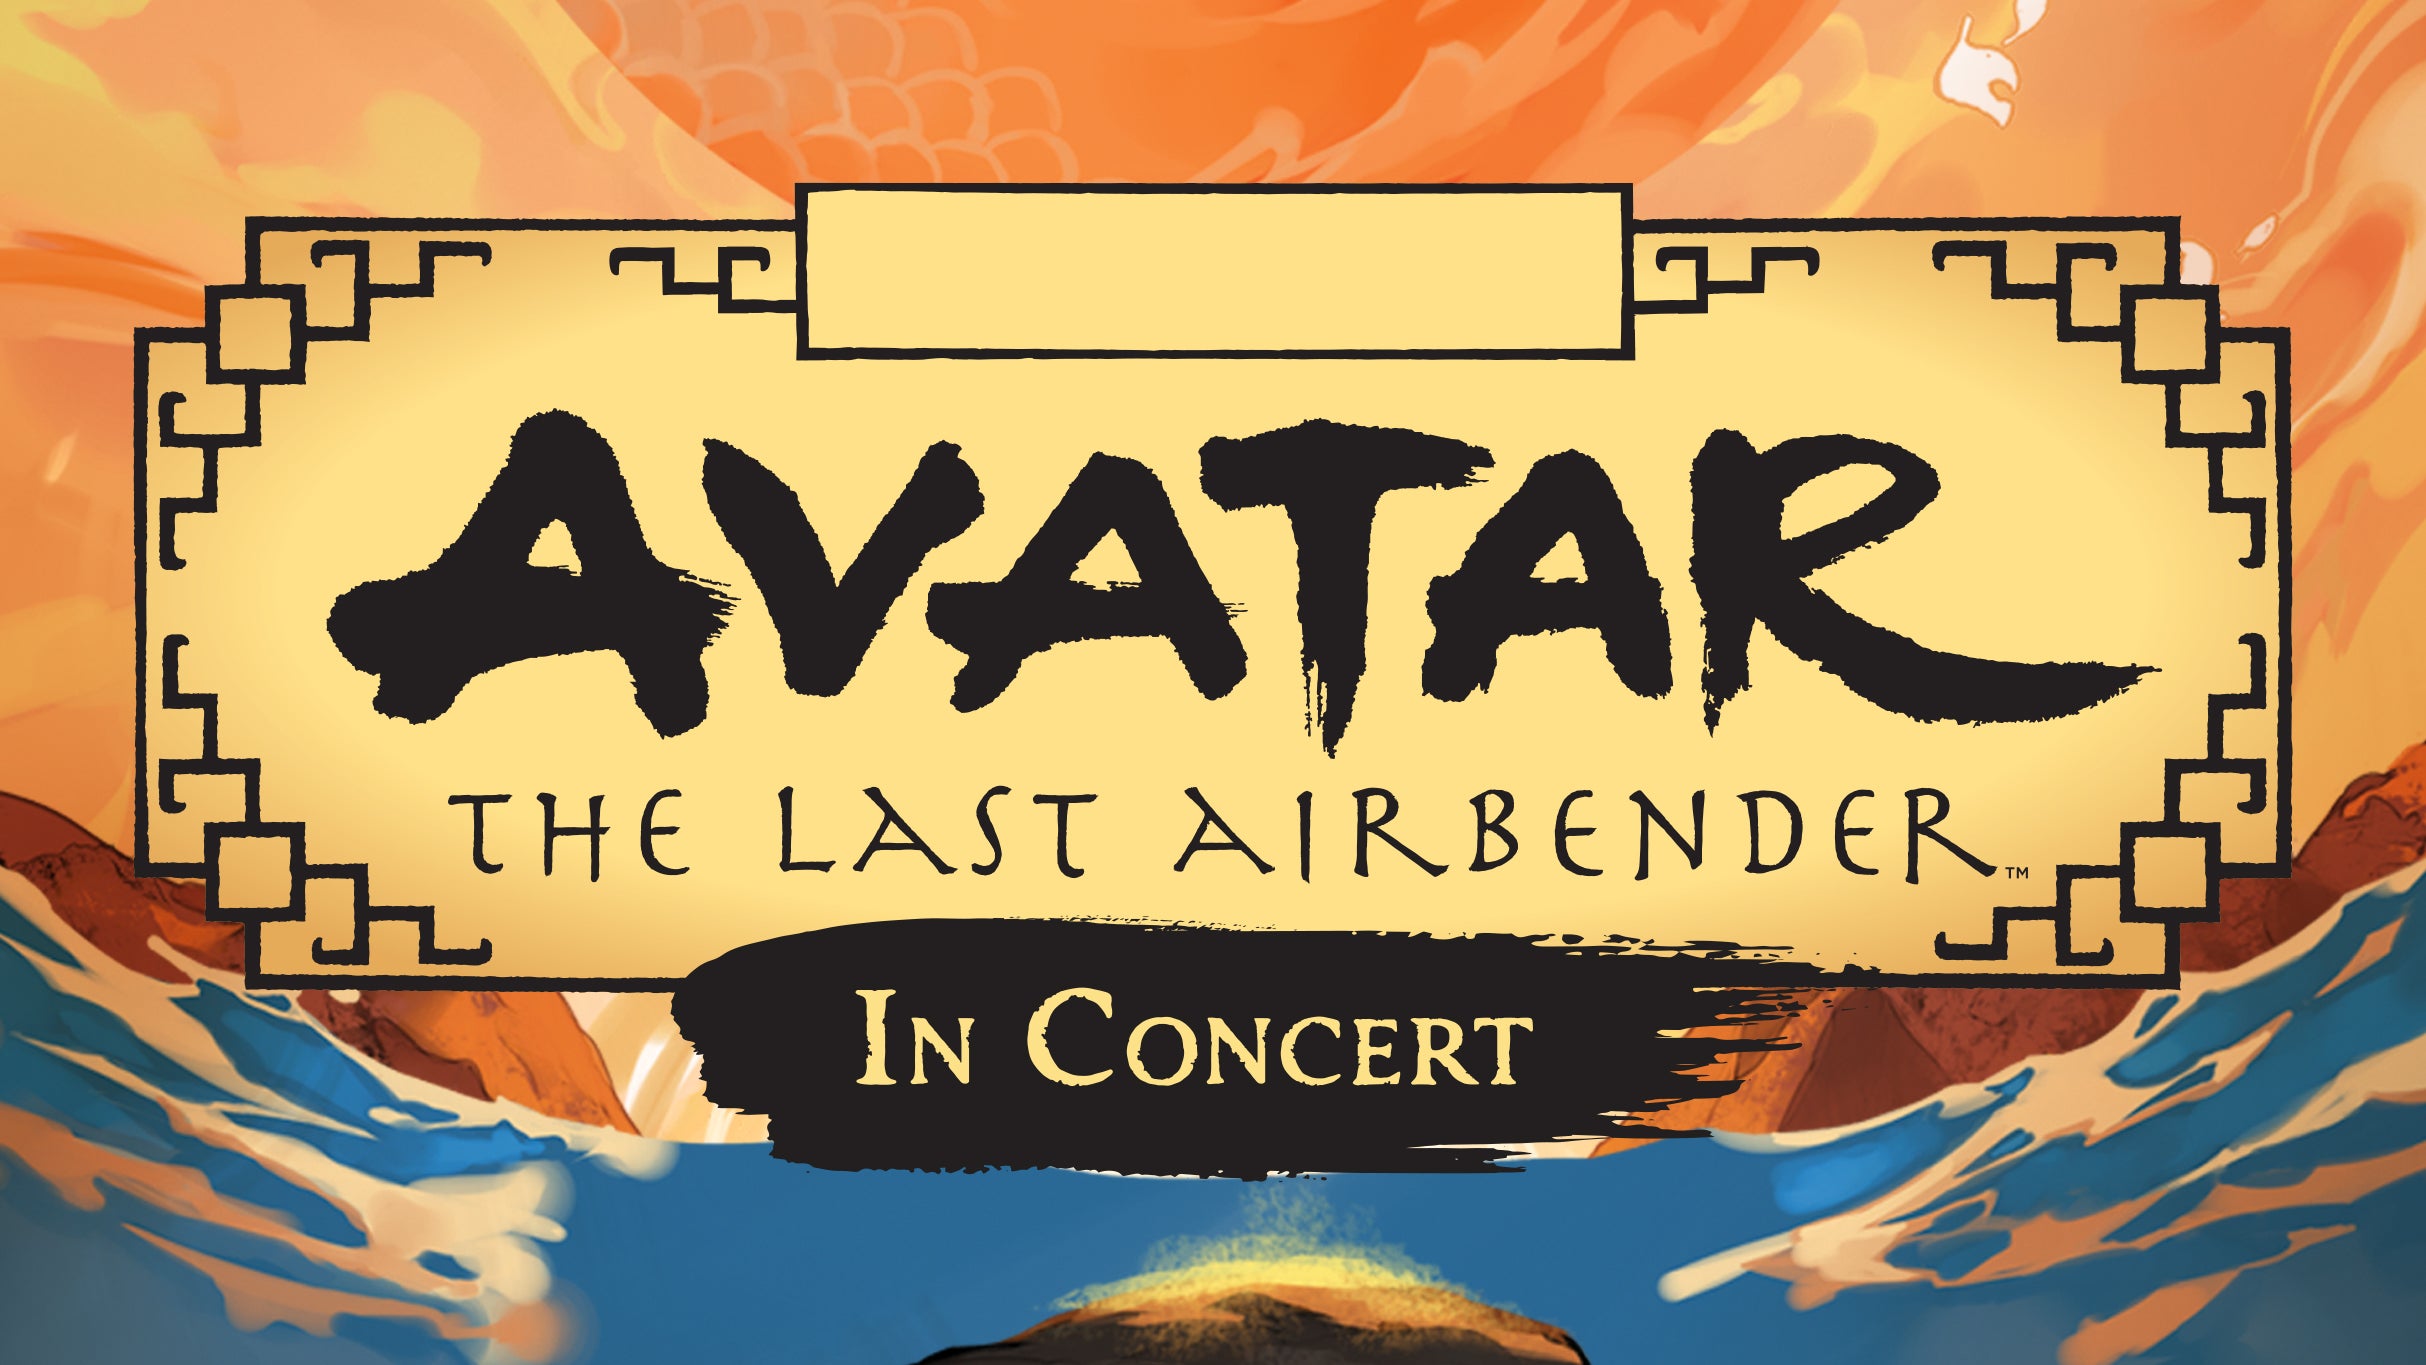 Avatar - The Last Airbender pre-sale code for show tickets in Greensboro, NC (Steven Tanger Center for the Performing Arts)